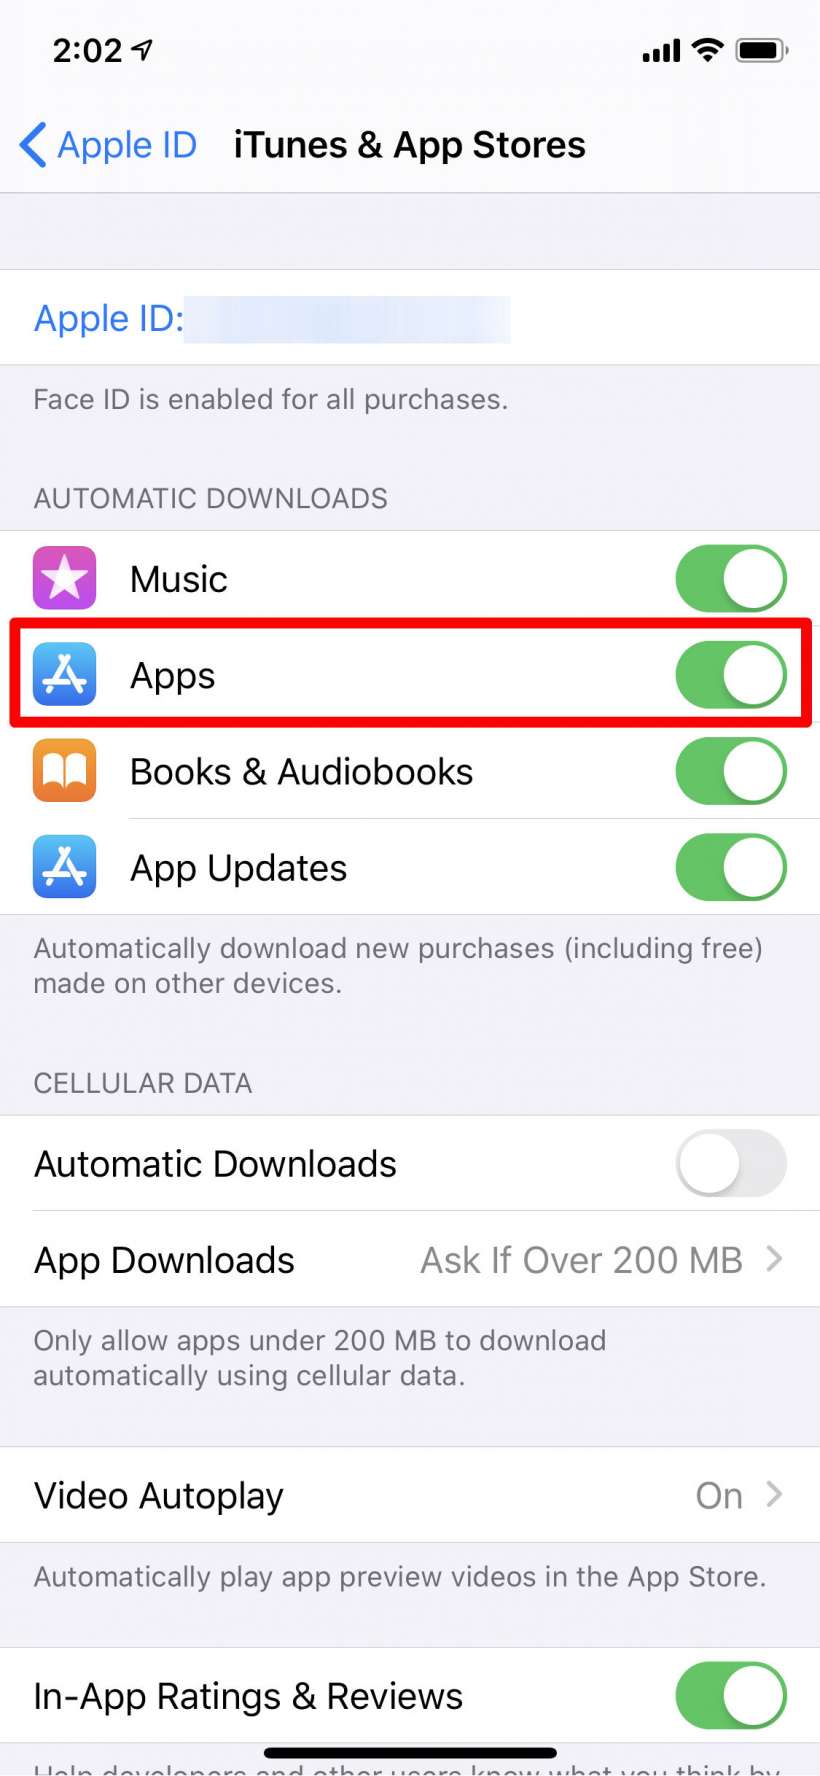 How to automatically download apps to all of your devices - iPhone, Mac, iPad.